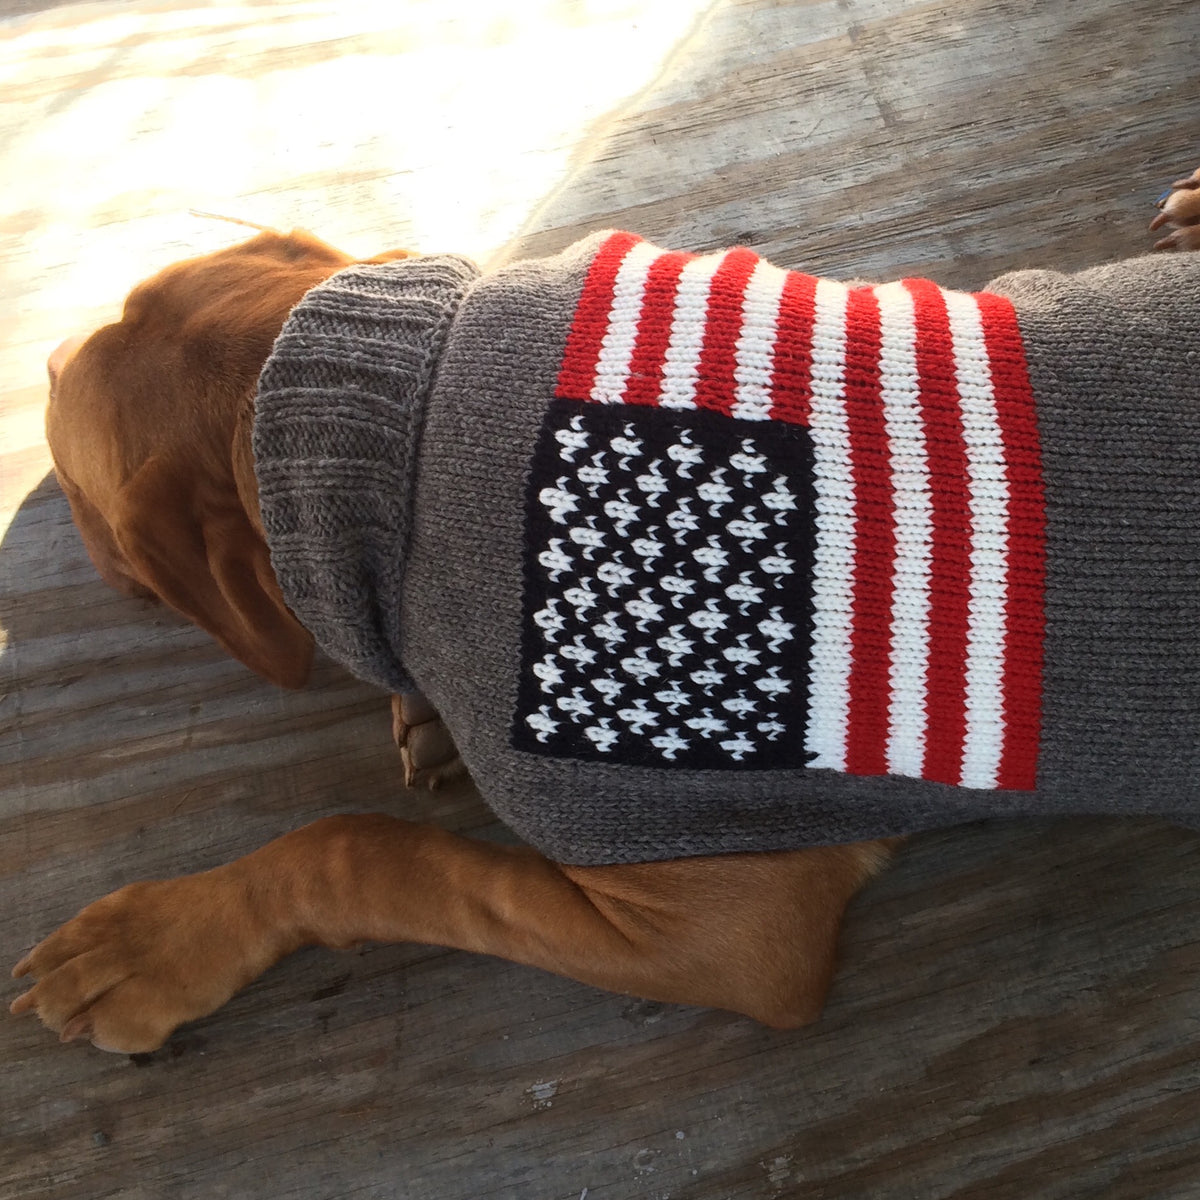 The All-American Dog Sweater